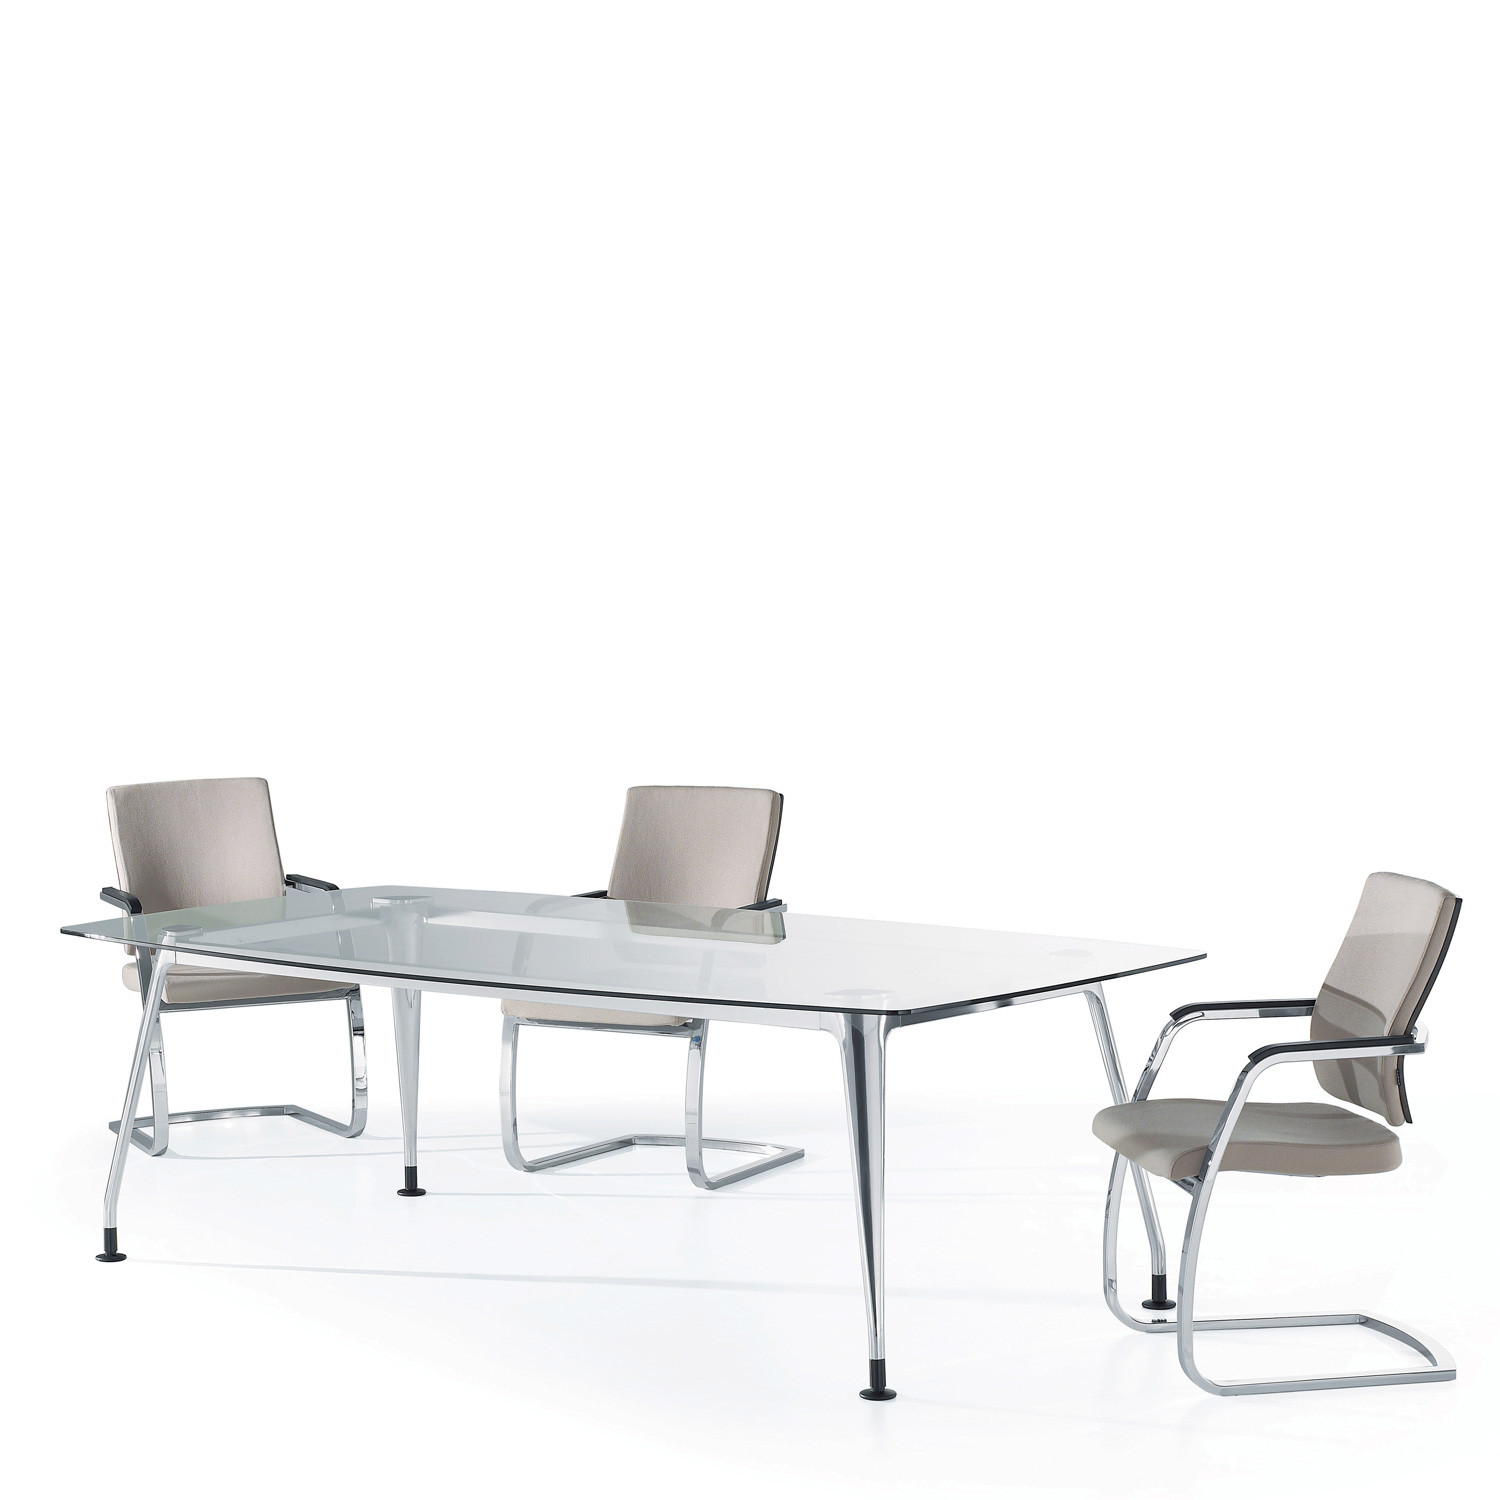 DNA Glass Meeting Table